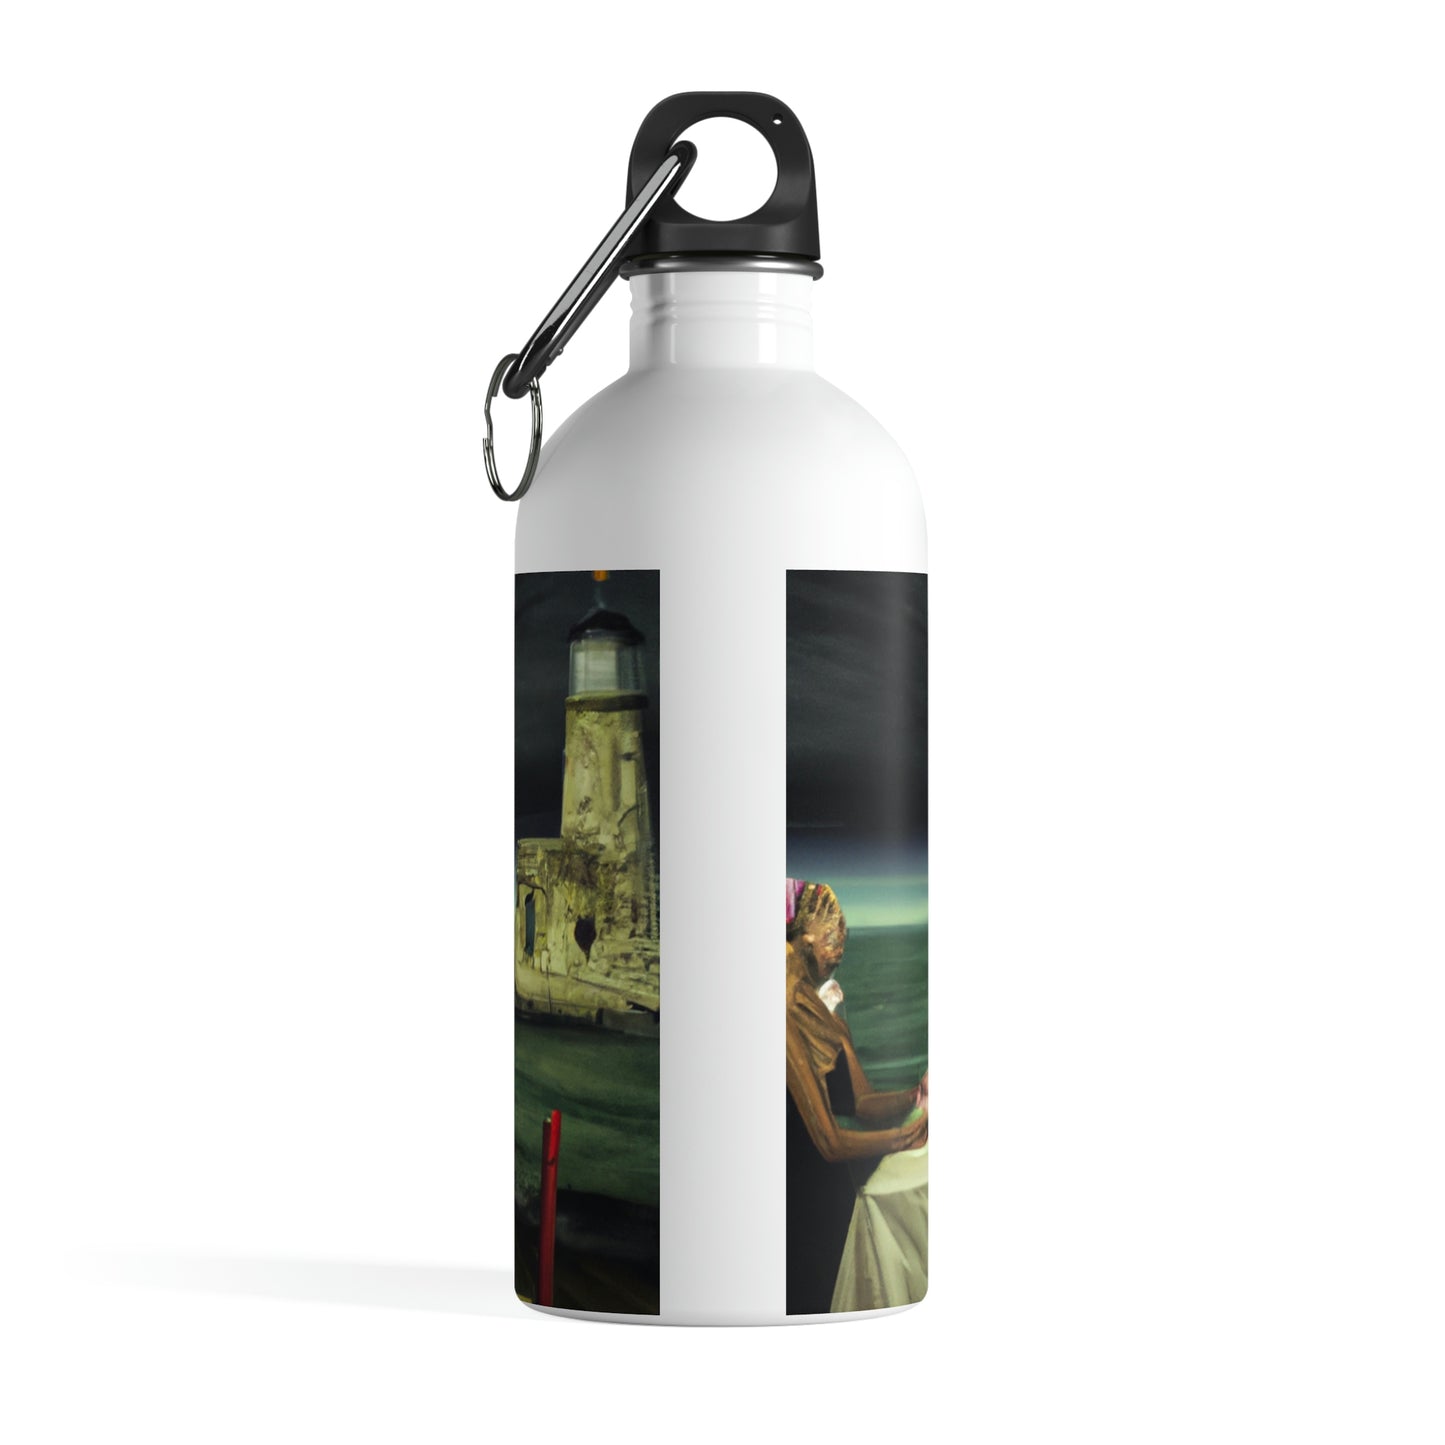 "A Beacon of Romance: An Intimate Candlelit Dinner in a Forgotten Lighthouse" - The Alien Stainless Steel Water Bottle